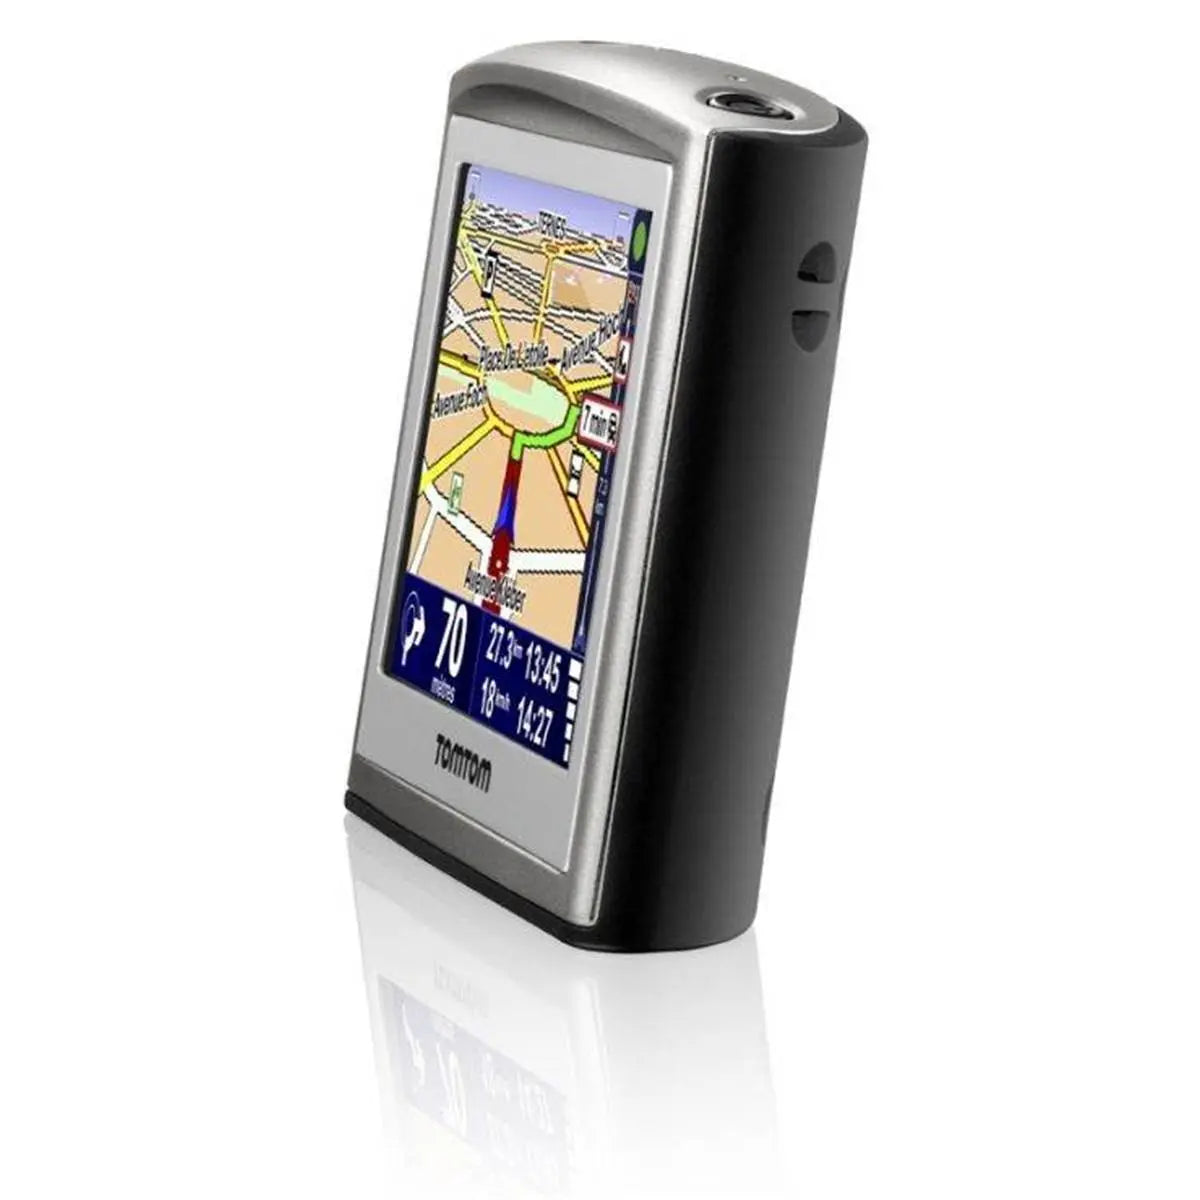 GPS TOMTOM ONE FRANCE CLASSIC Tomtom